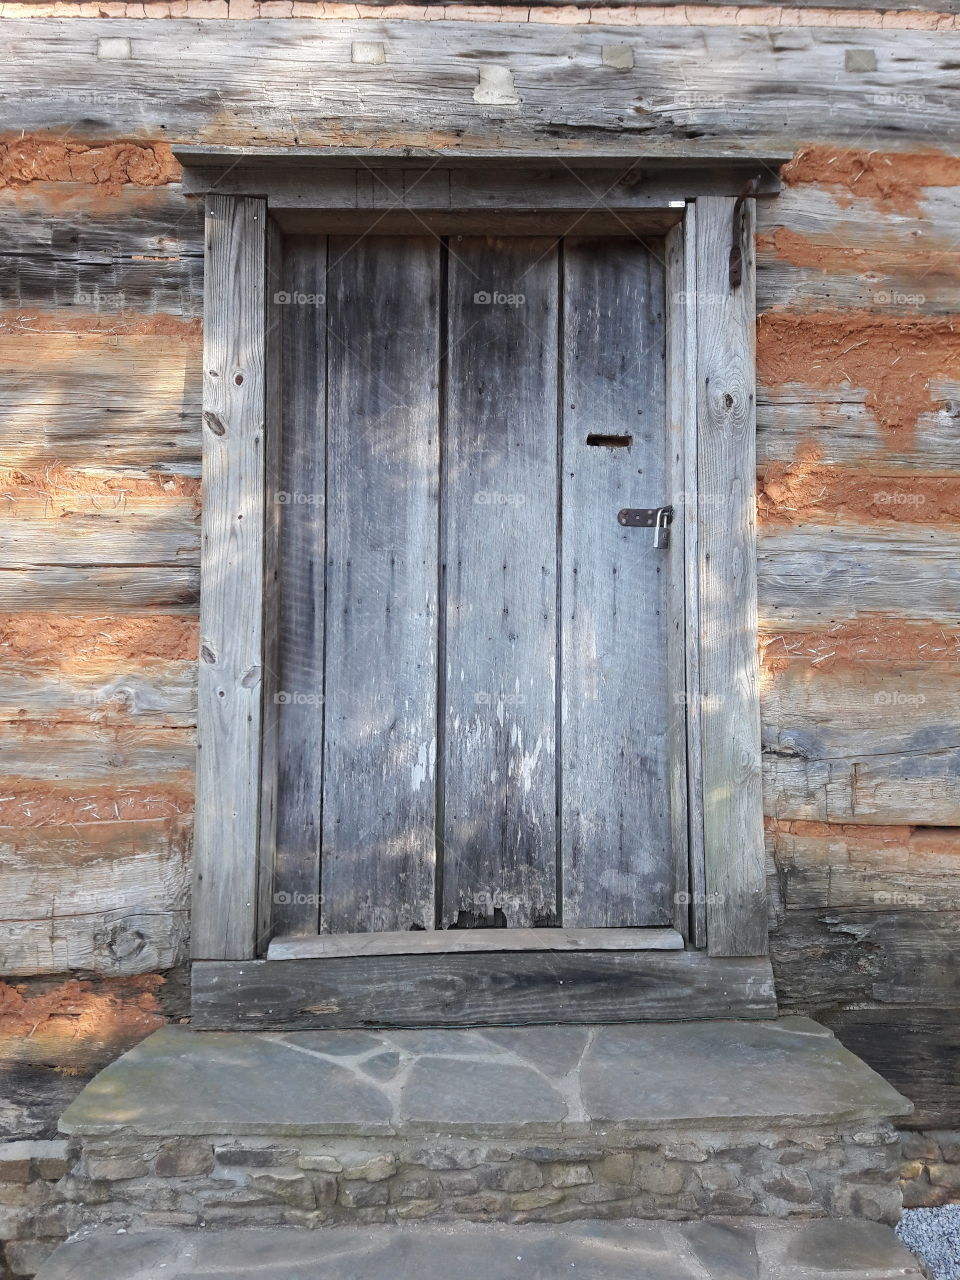 This is a close up of a cabin door from the 1700s. Everything inside was left alone so it can stay as it was from way back then.